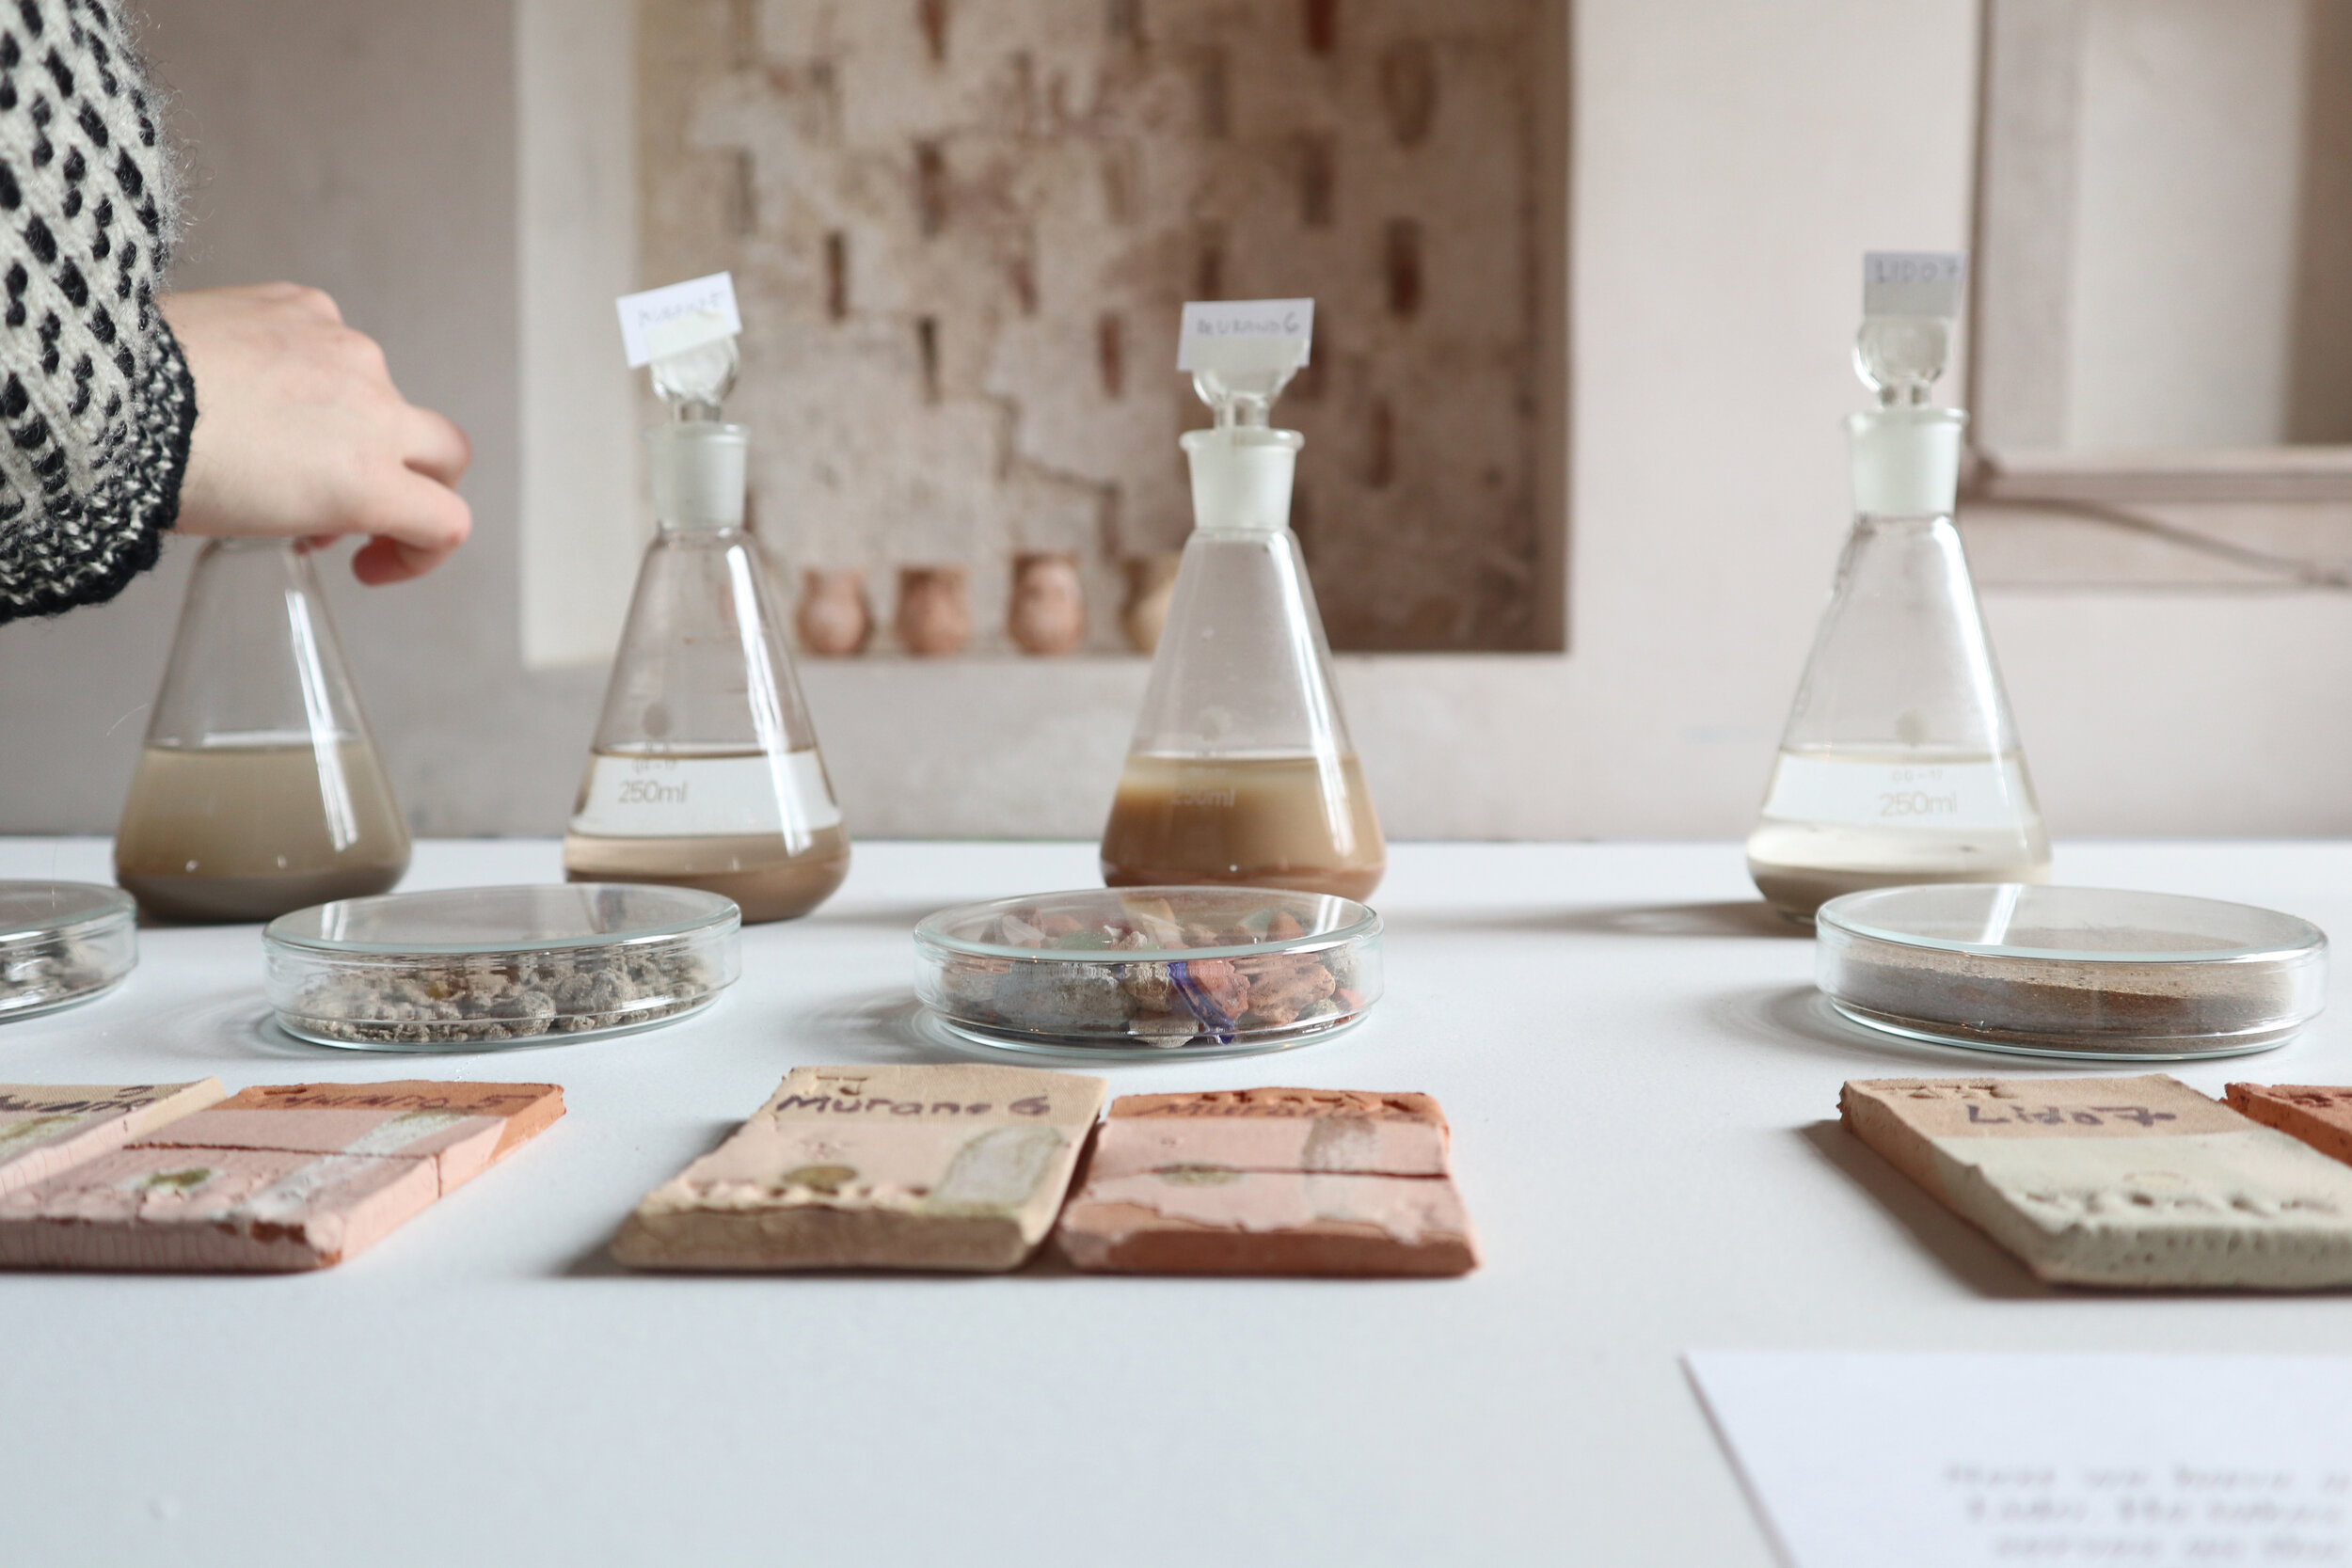   Soil Samples and ceramic test tiles from the Traces from the Anthropocene: Working with Soil project (2019). Photo: Tzuyu Chen  